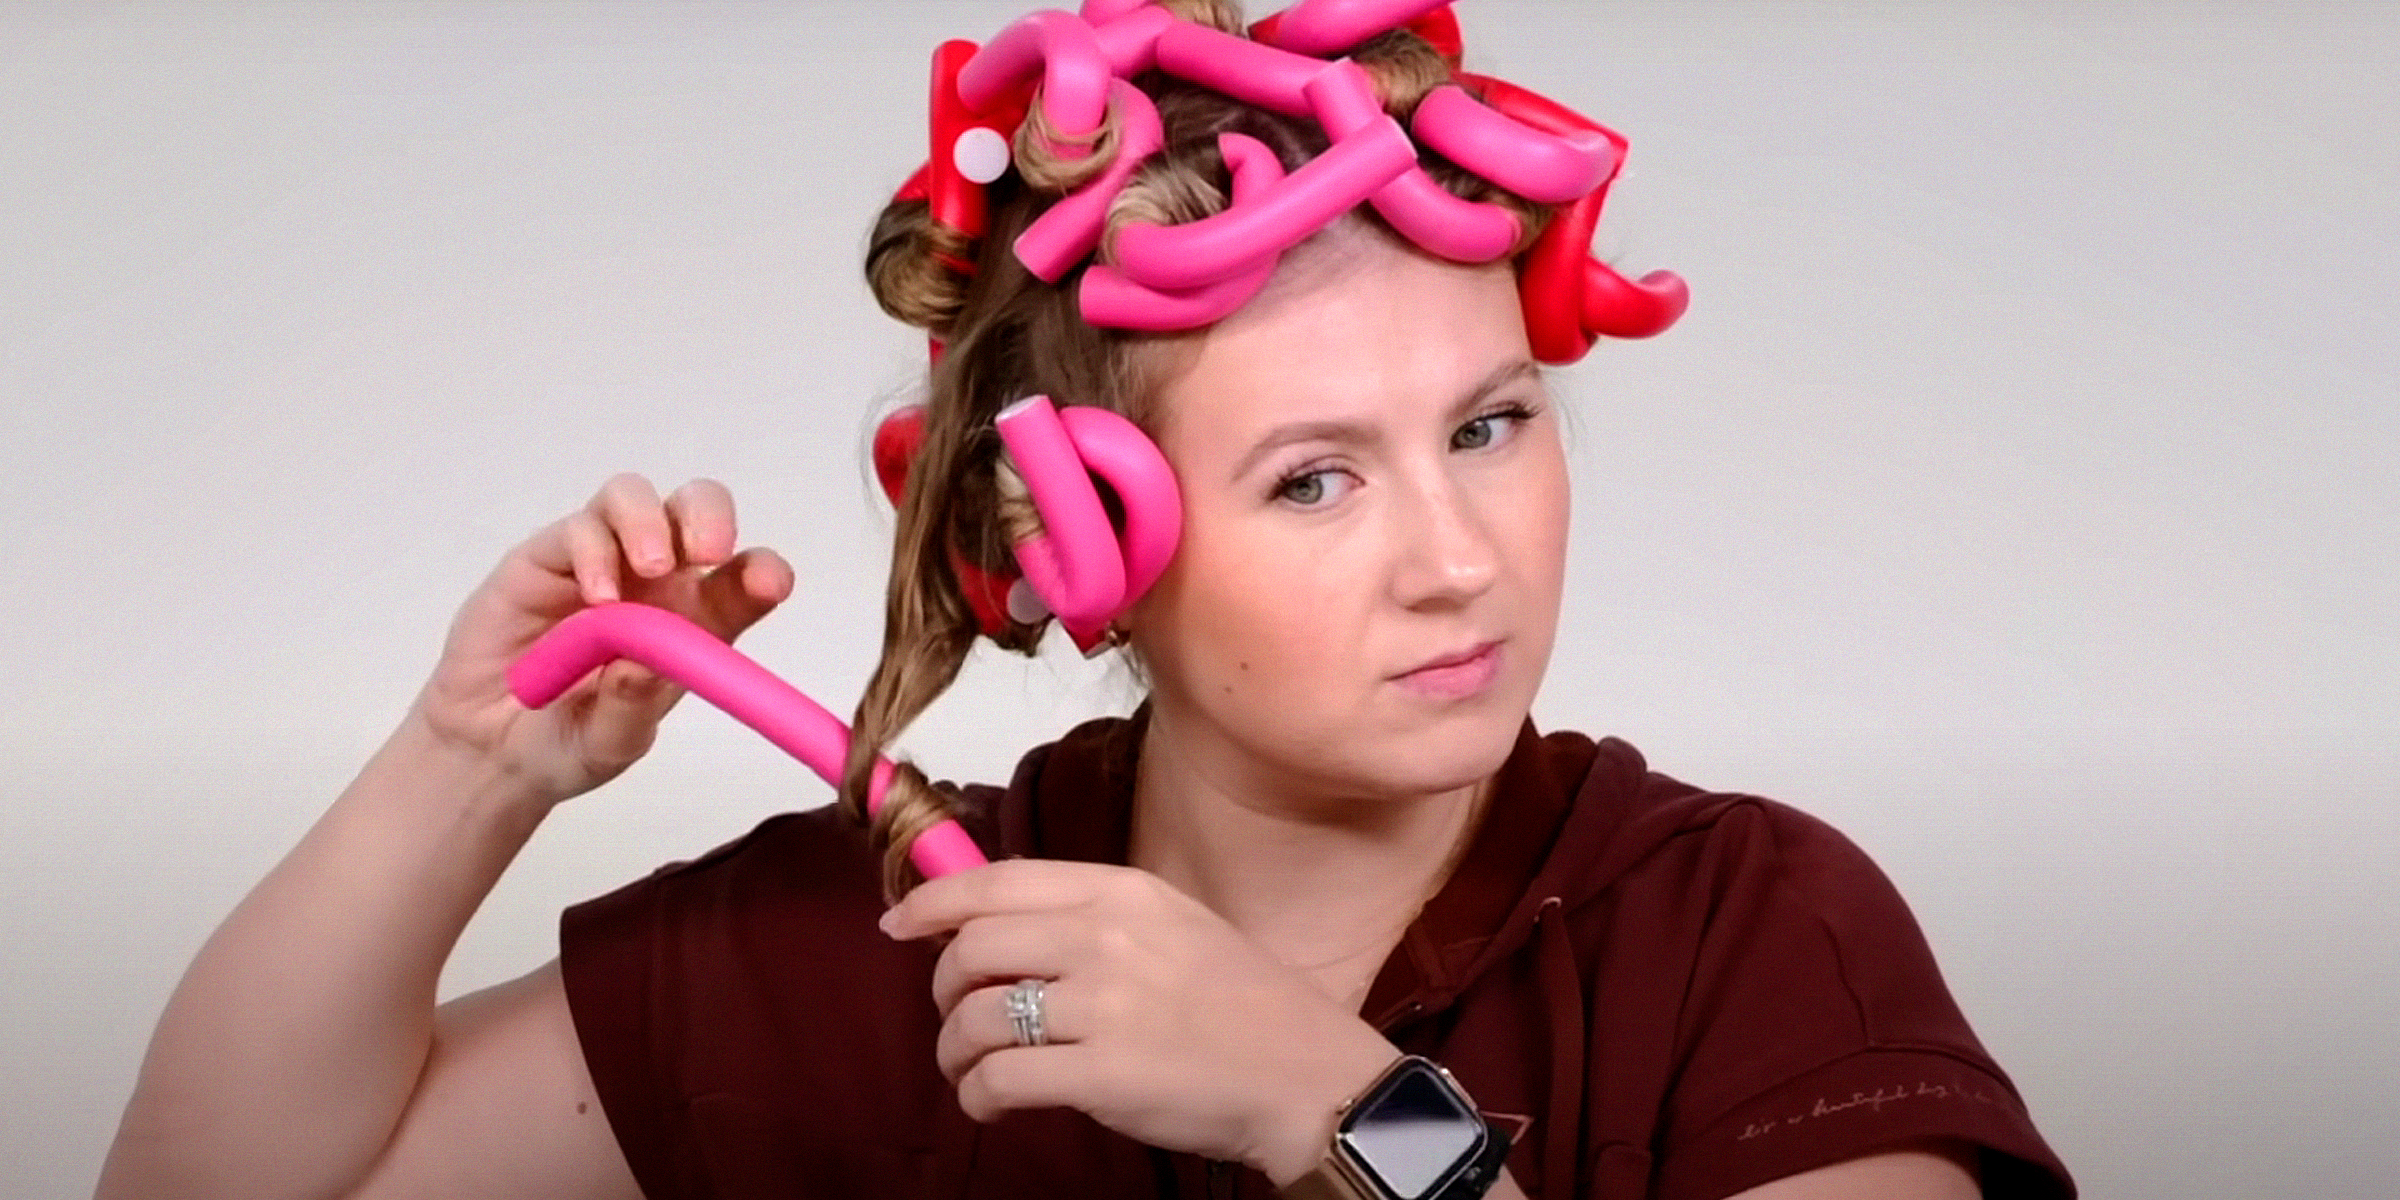 A woman using flexible curling rods | Source: YouTube/@Milabuco